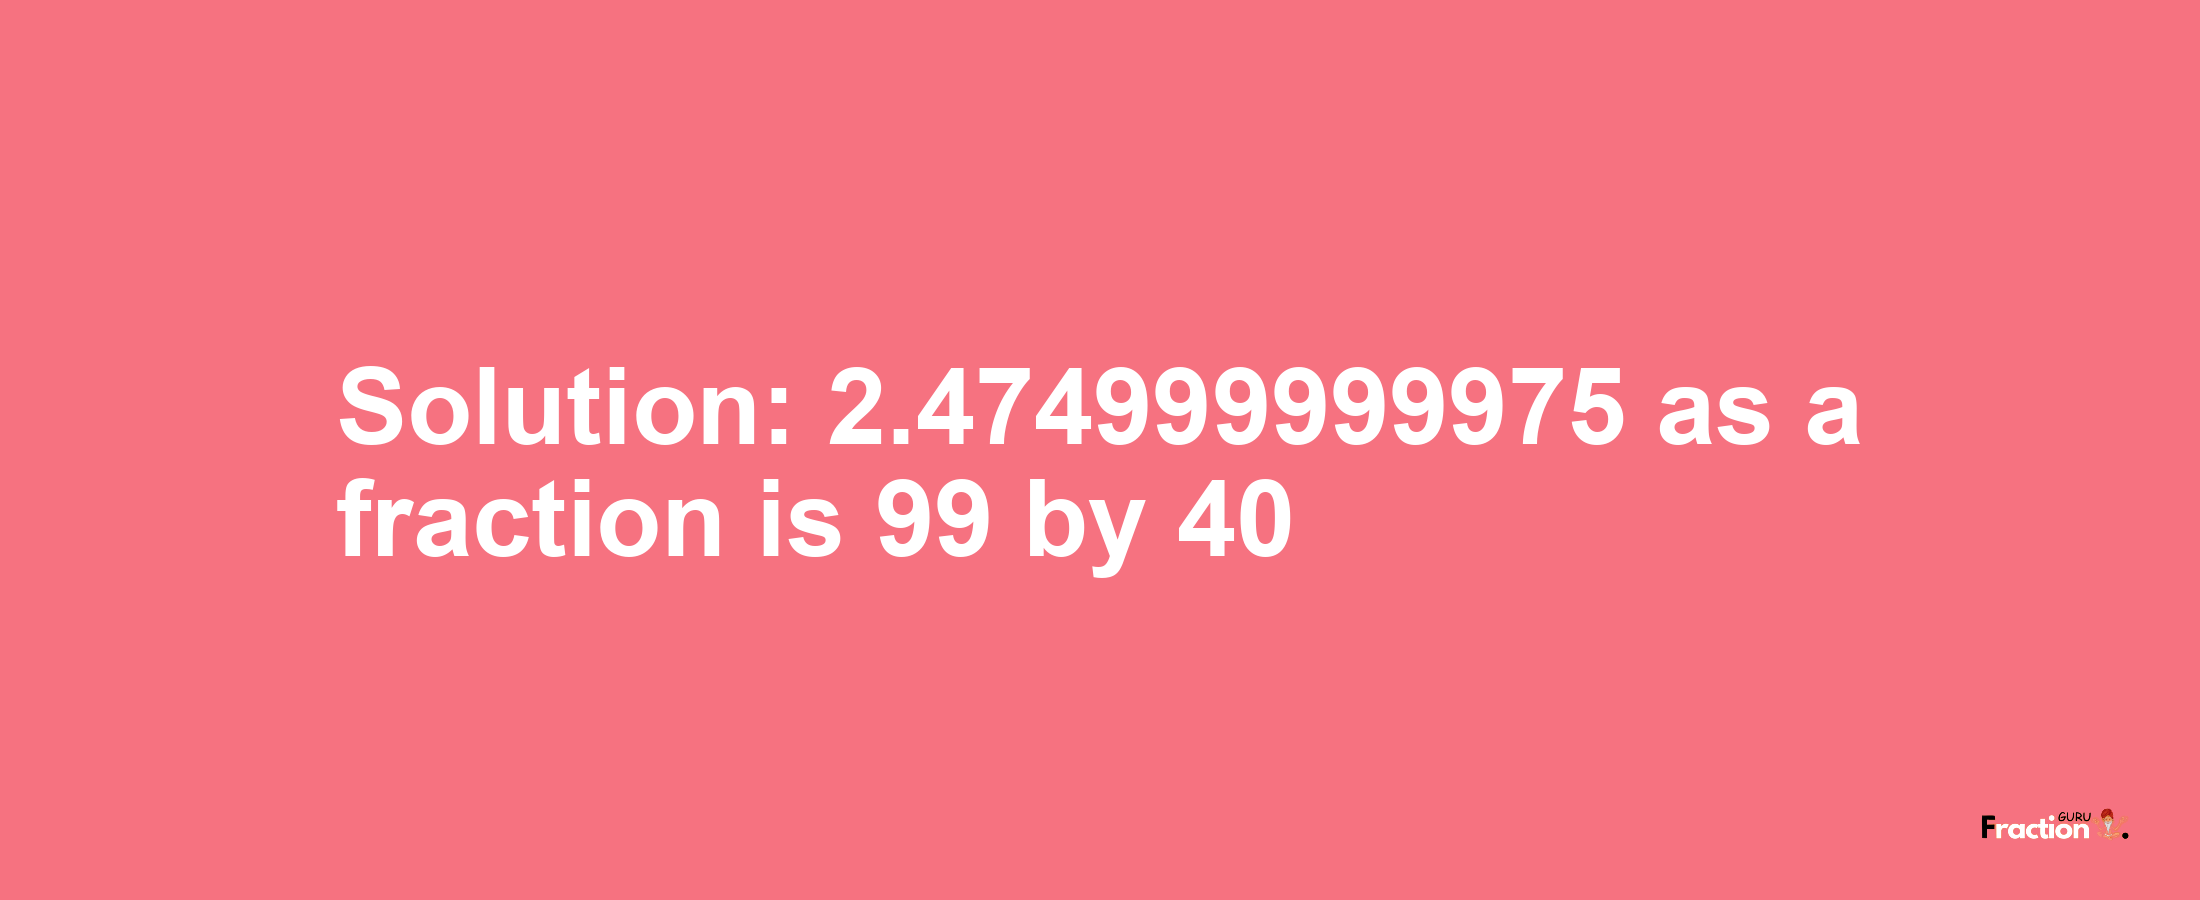 Solution:2.474999999975 as a fraction is 99/40